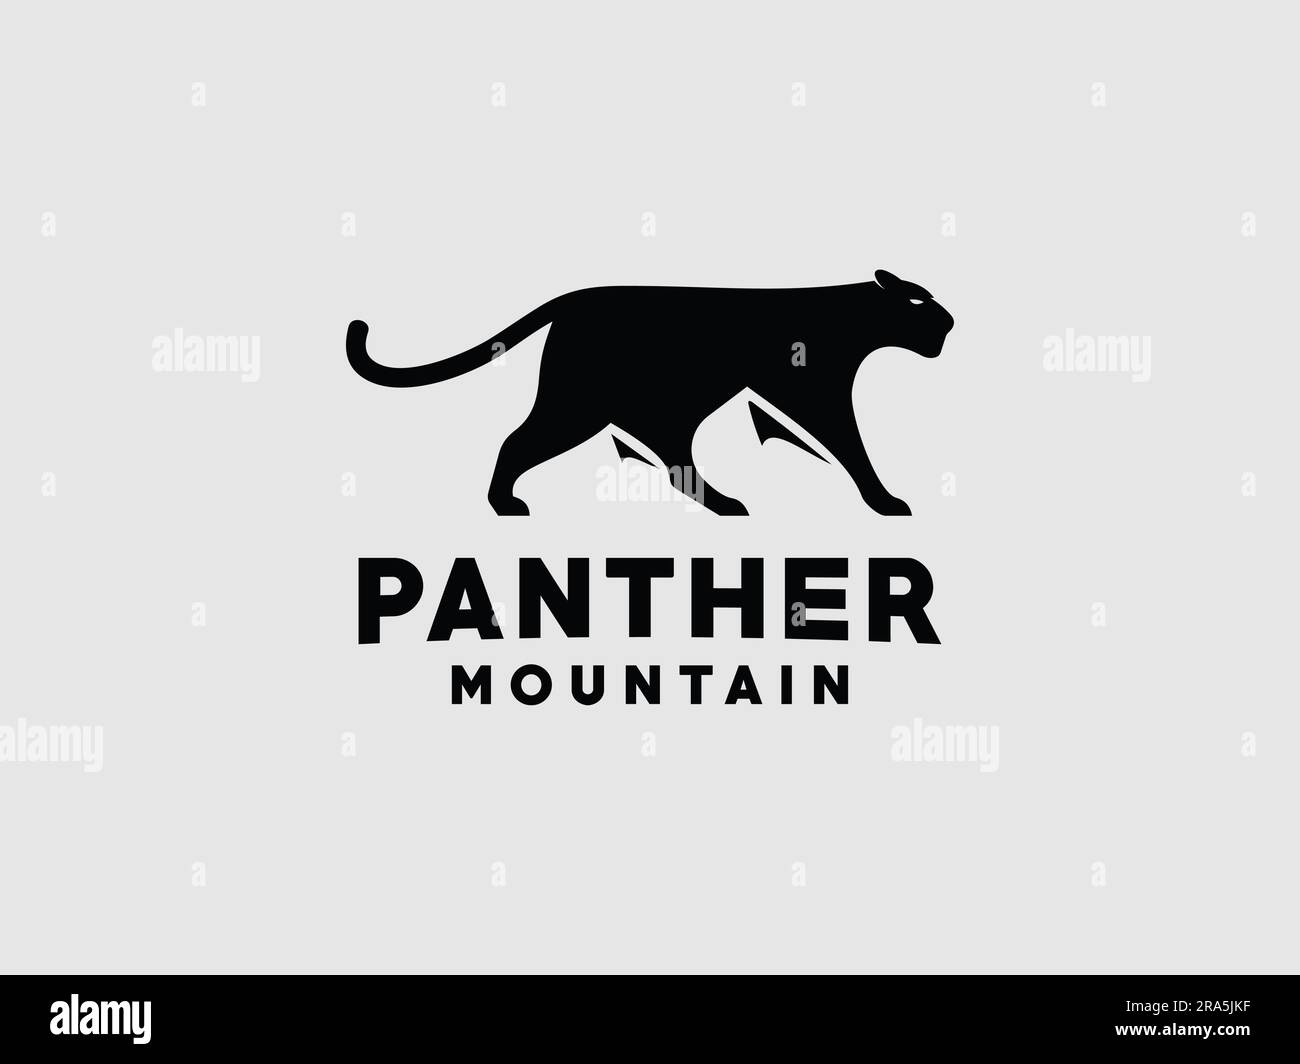 Minimal Panther mountain logo, suitable for many business orientation. Stock Vector